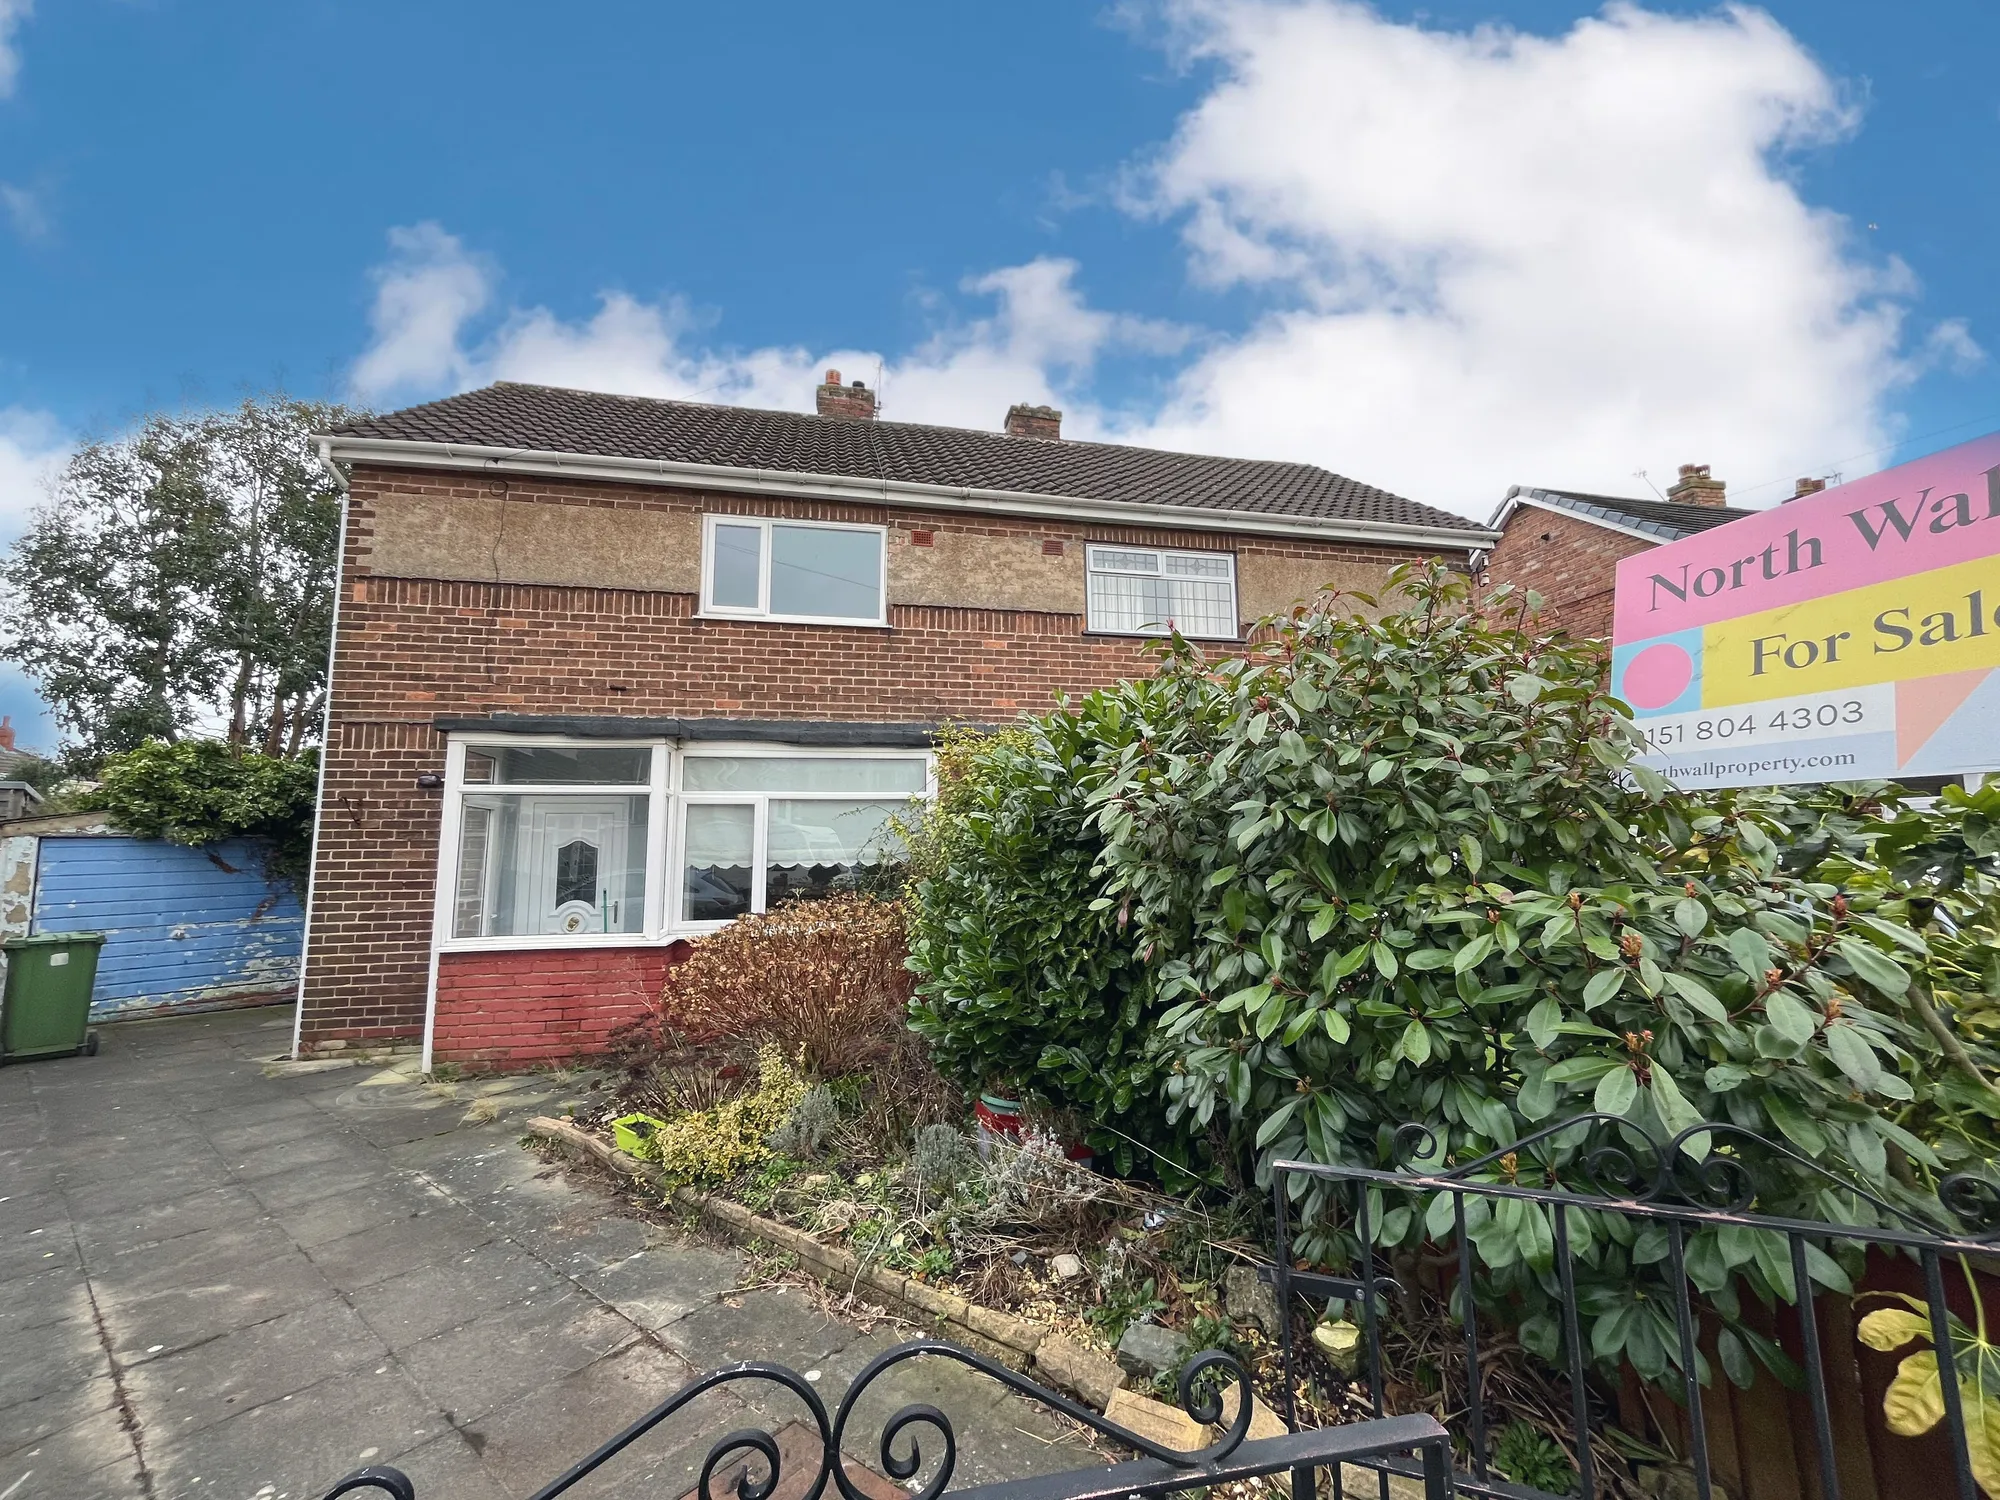 Welcome to this fantastic refurbishment opportunity nestled in the heart of Maghull! Situated at the head of a quiet cul-de-sac, this three-bedroom semi-detached home on Hathaway presents an ideal canvas for your dream residence.